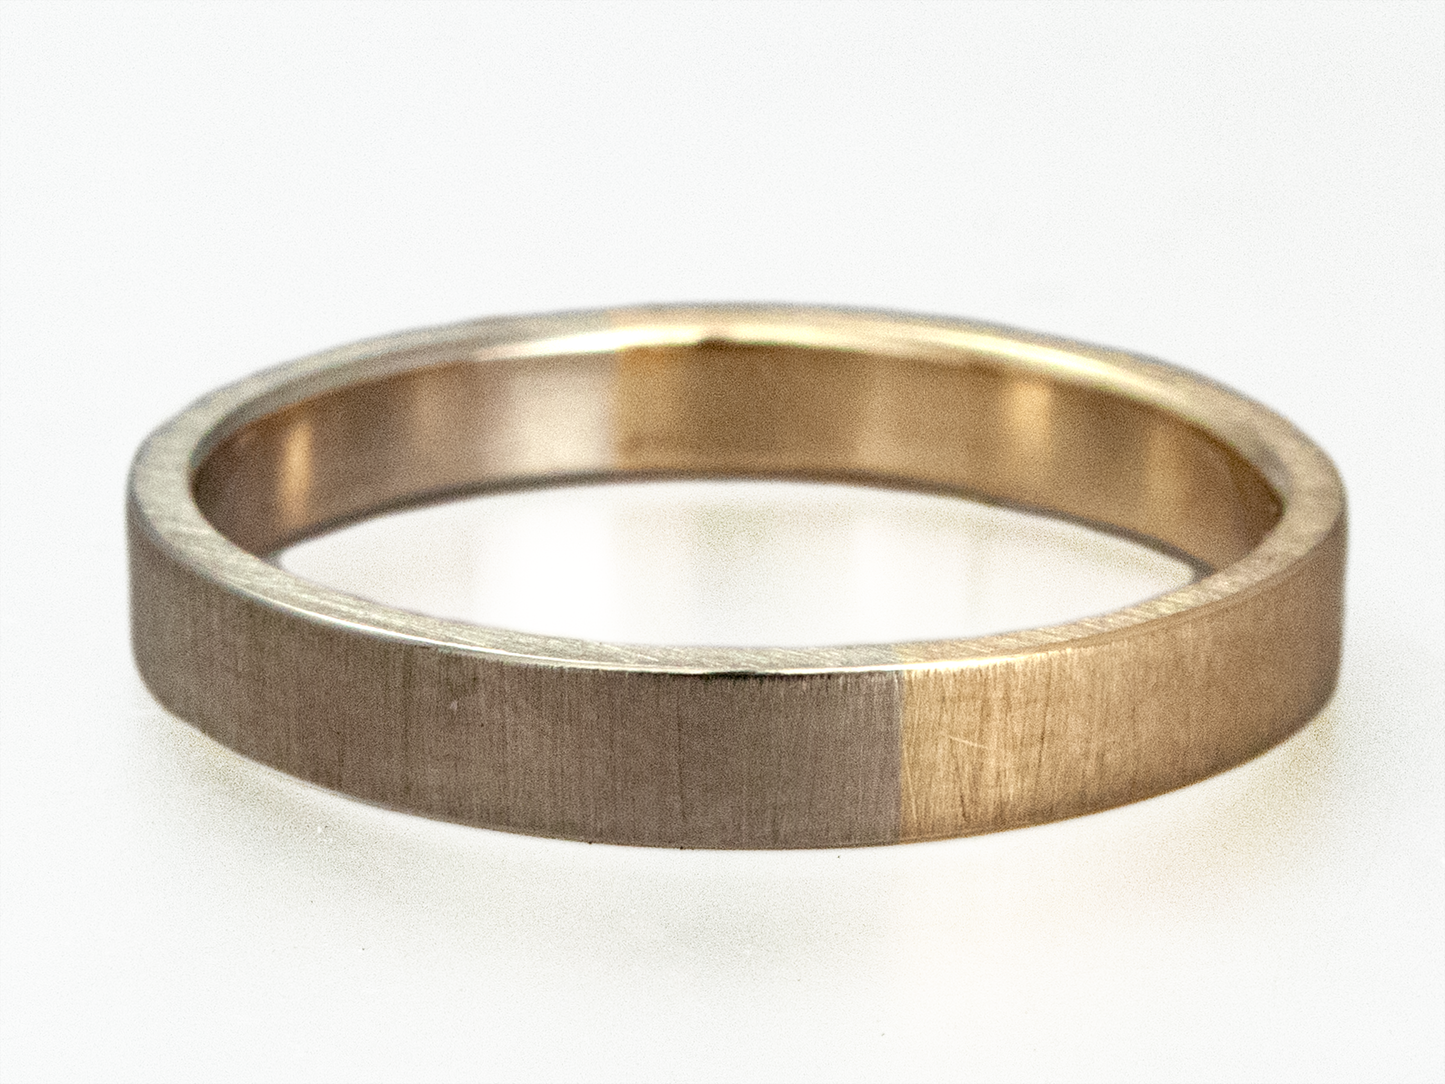 50/50 Partnership Wide Flat Two Tone Gold Wedding Ring - mix of 14k white, yellow or rose gold, 3mm-6mm width